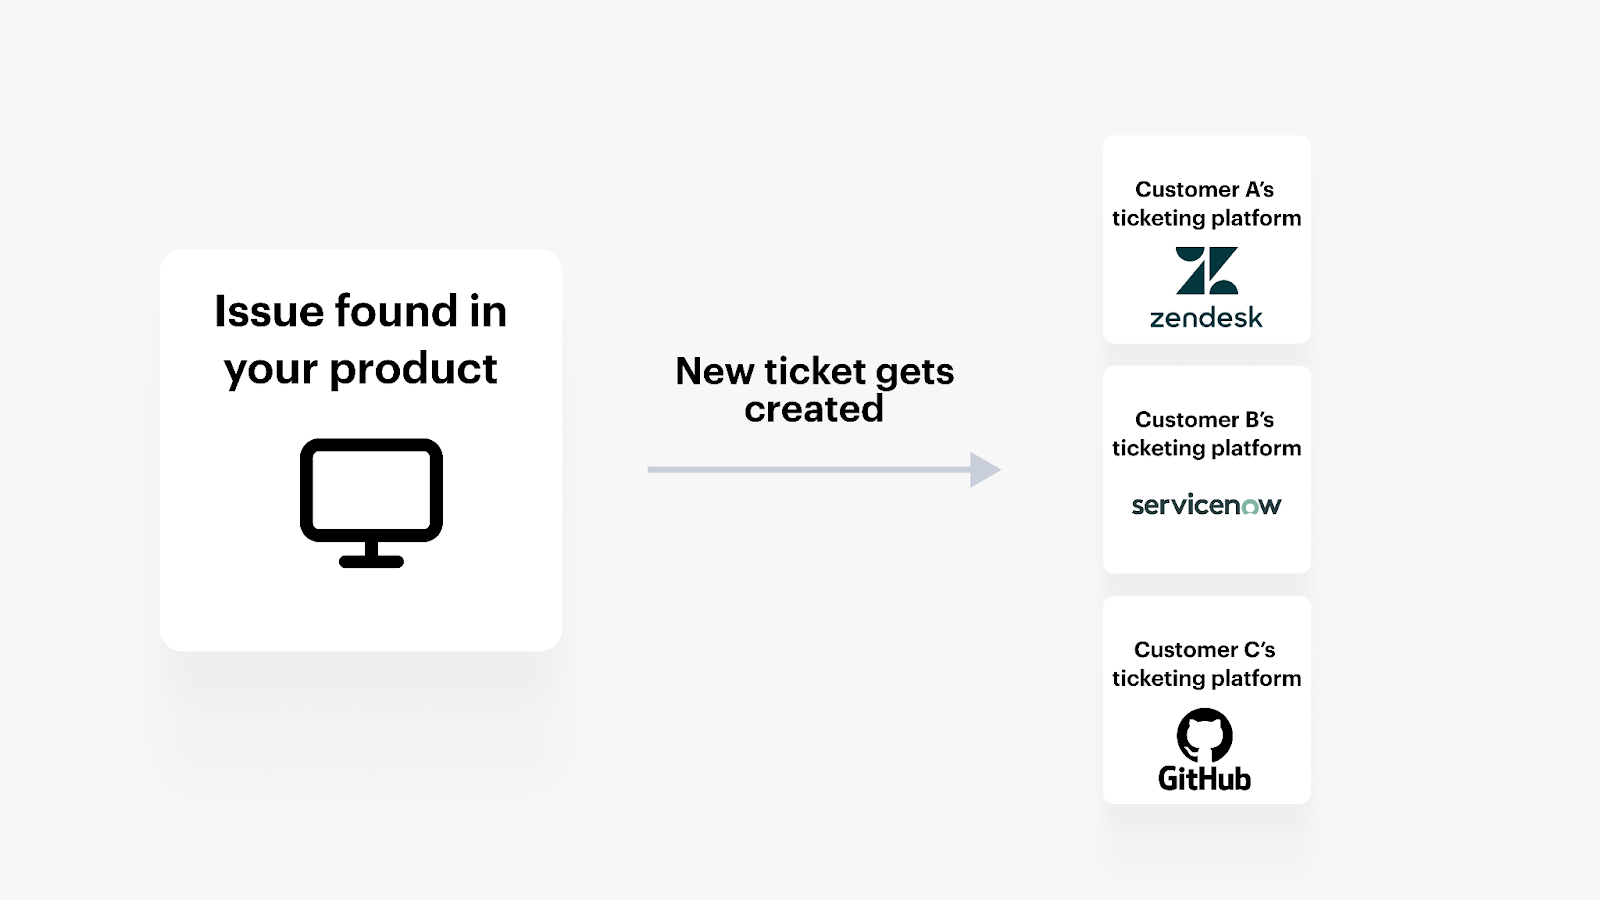 Customer-facing integration for creating tickets in clients' ticketing systems when your product finds an issue